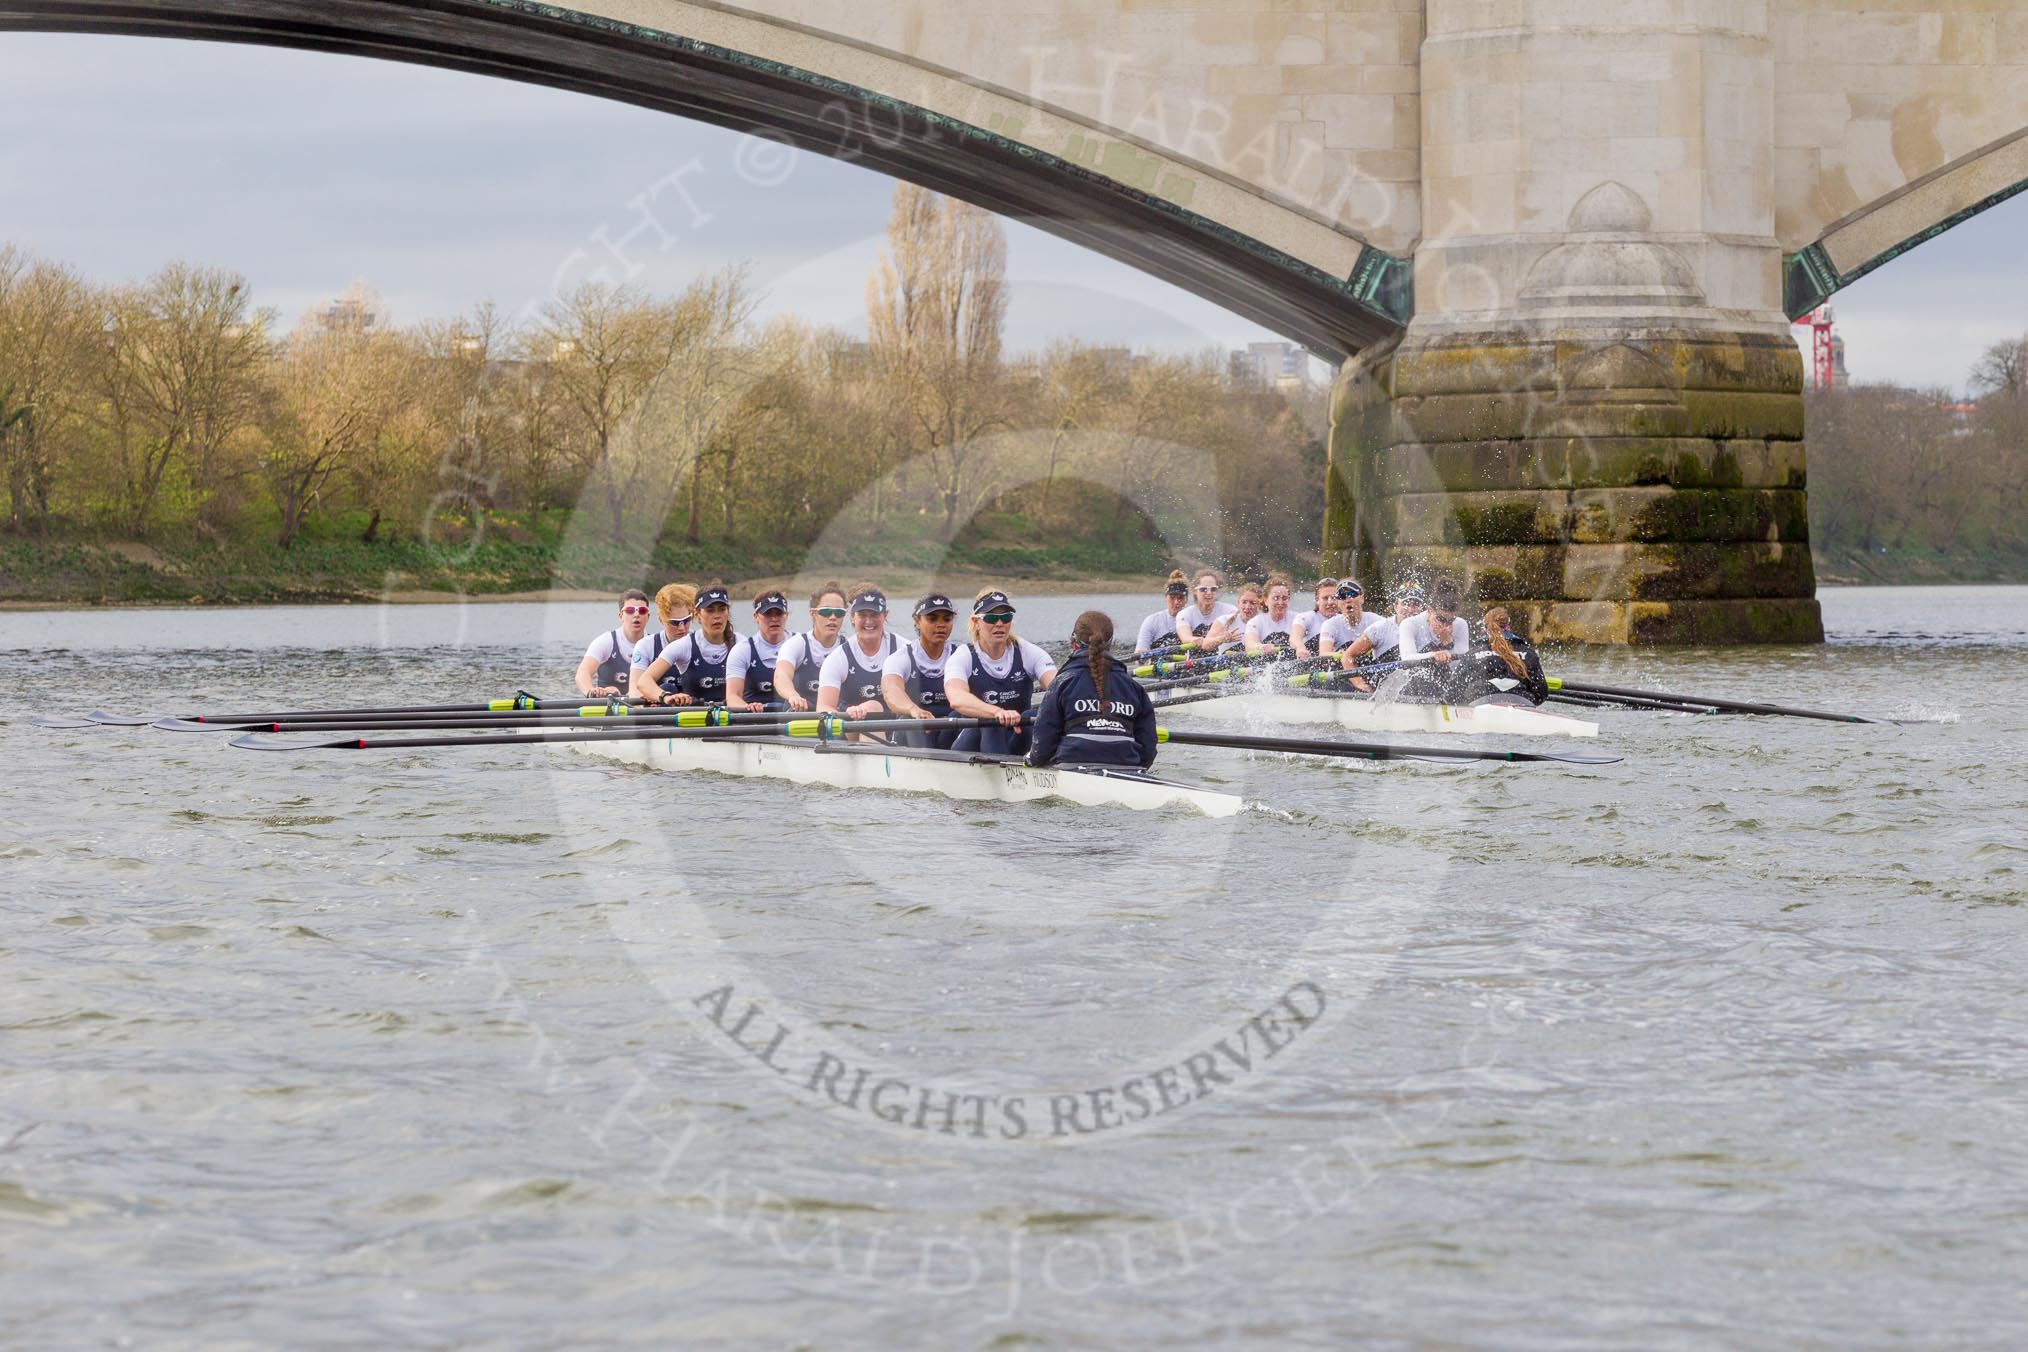 The Cancer Research UK Boat Race season 2017 - Women's Boat Race Fixture OUWBC vs Molesey BC: At the finish line of the second part of the fixture, Molesey is about a length ahead of Oxford.
River Thames between Putney Bridge and Mortlake,
London SW15,

United Kingdom,
on 19 March 2017 at 16:26, image #164